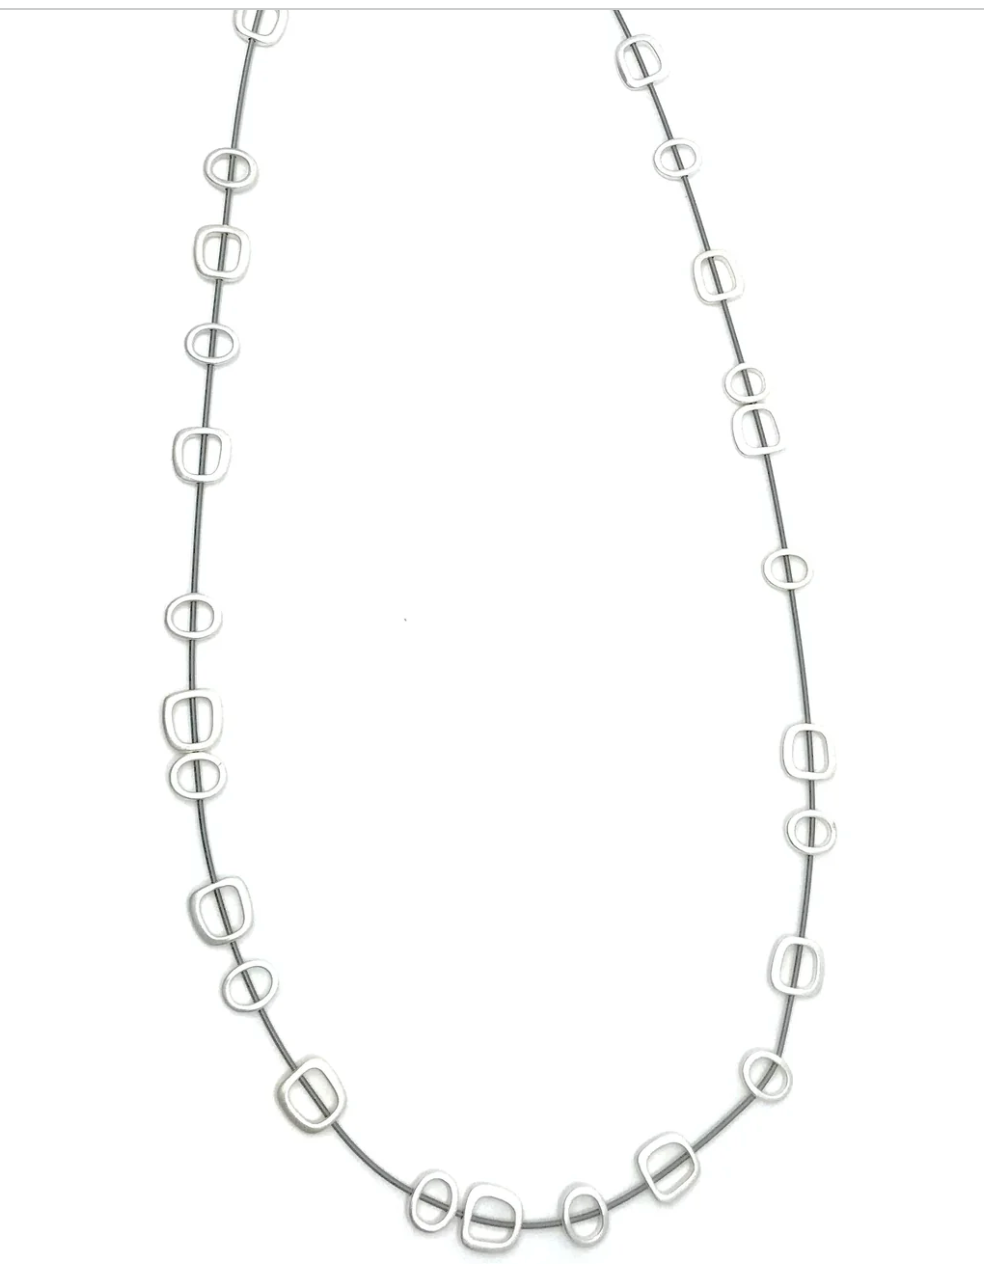 Long Geometric Silver Tone Sea Lily Necklace